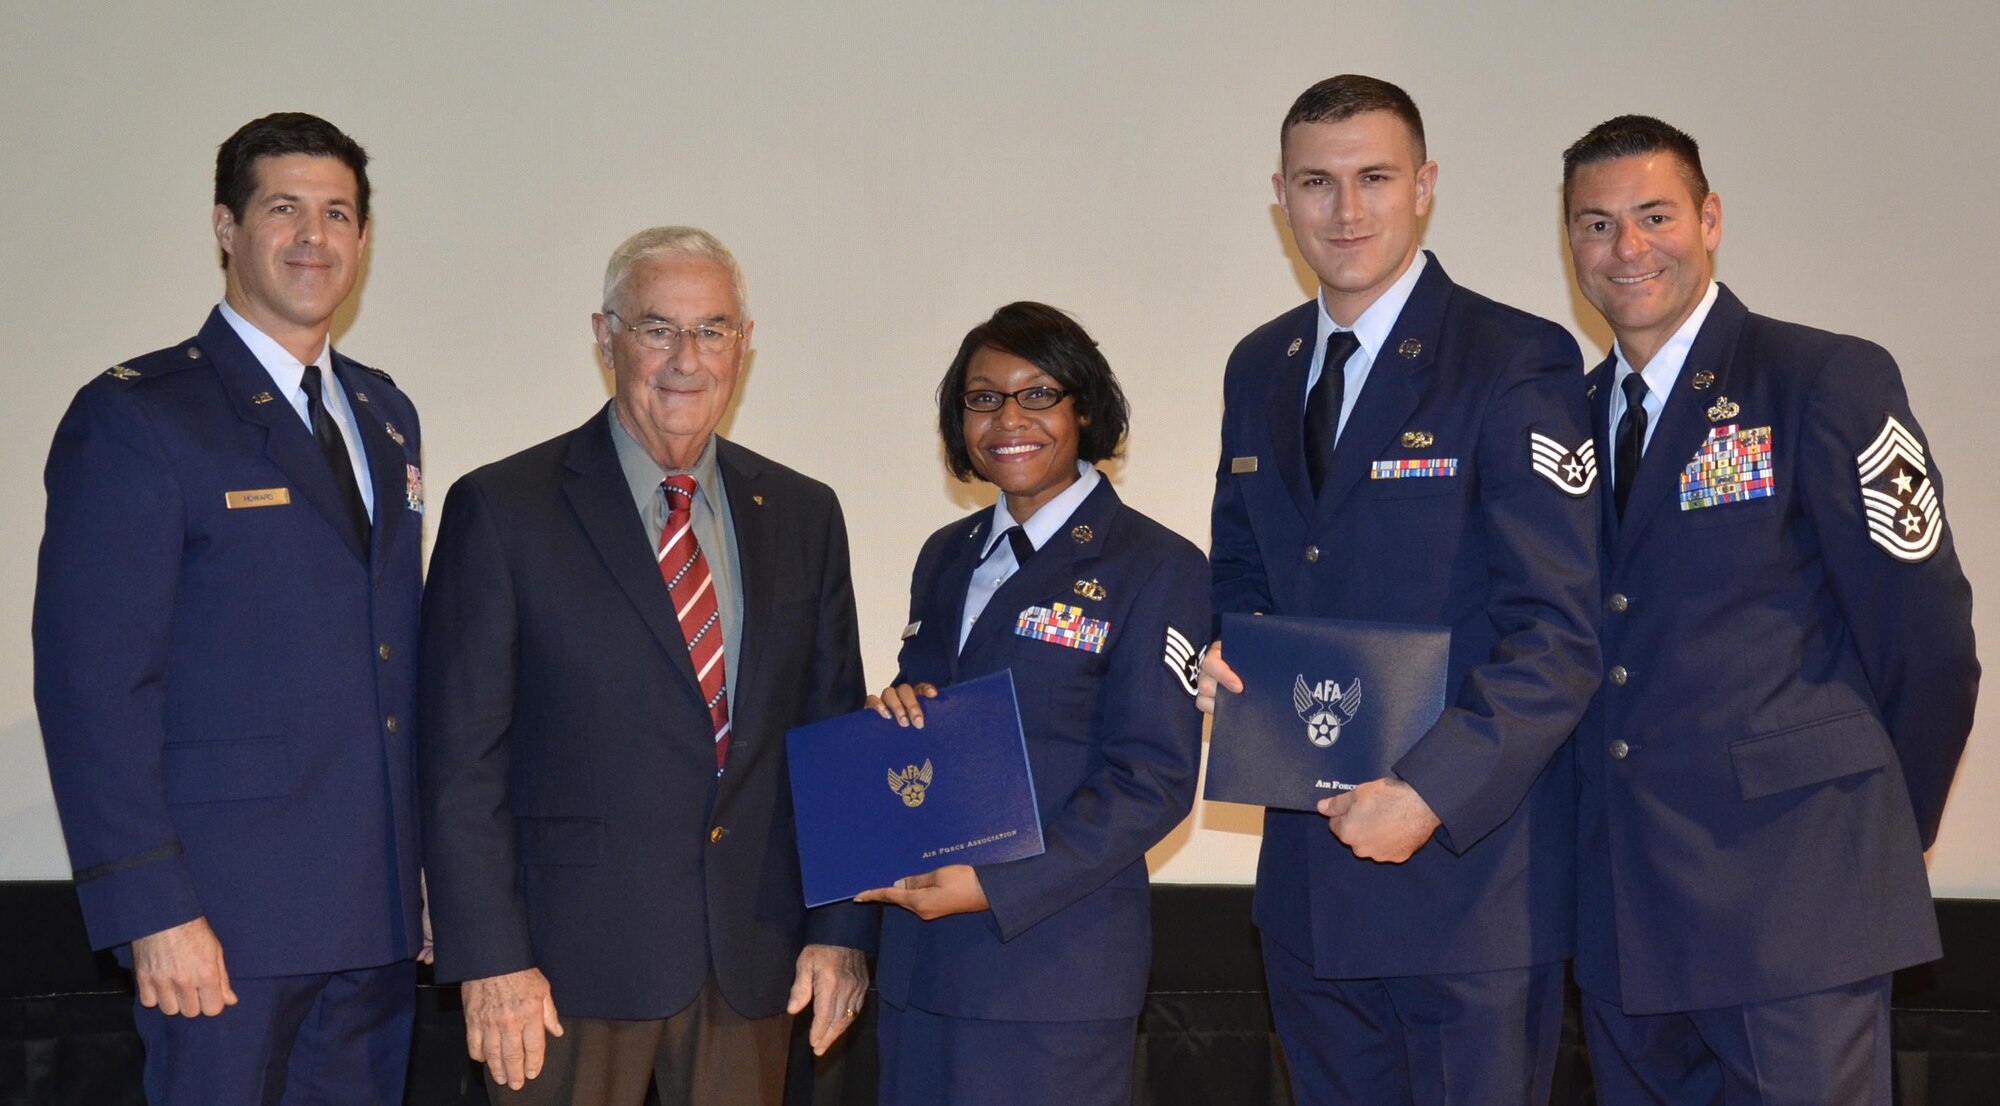 Staff Sgts. Tracy Parks, 920th Force Support Squadron and Jason, Coker, 920th Aircraft Maintenance Squadron, were presented with the William H. Pitsenbarger Award for pursuing higher education during the Community College of the Air Force graduation ceremony at Patrick Air Force Base, Florida, Dec. 5.  The airmen received a certificate and a $400 check from the Air Force Association. From left: Col. Paul "Brett" Howard, 920th Rescue Wing vice commander, retired Chief Master Sgt. Chris Bailey, president of the local Air Force Association chapter; and 920th RQW Command Chief Tim Bianchi. (U.S. Air Force photo/2nd Lt. Annamarie Wyant)